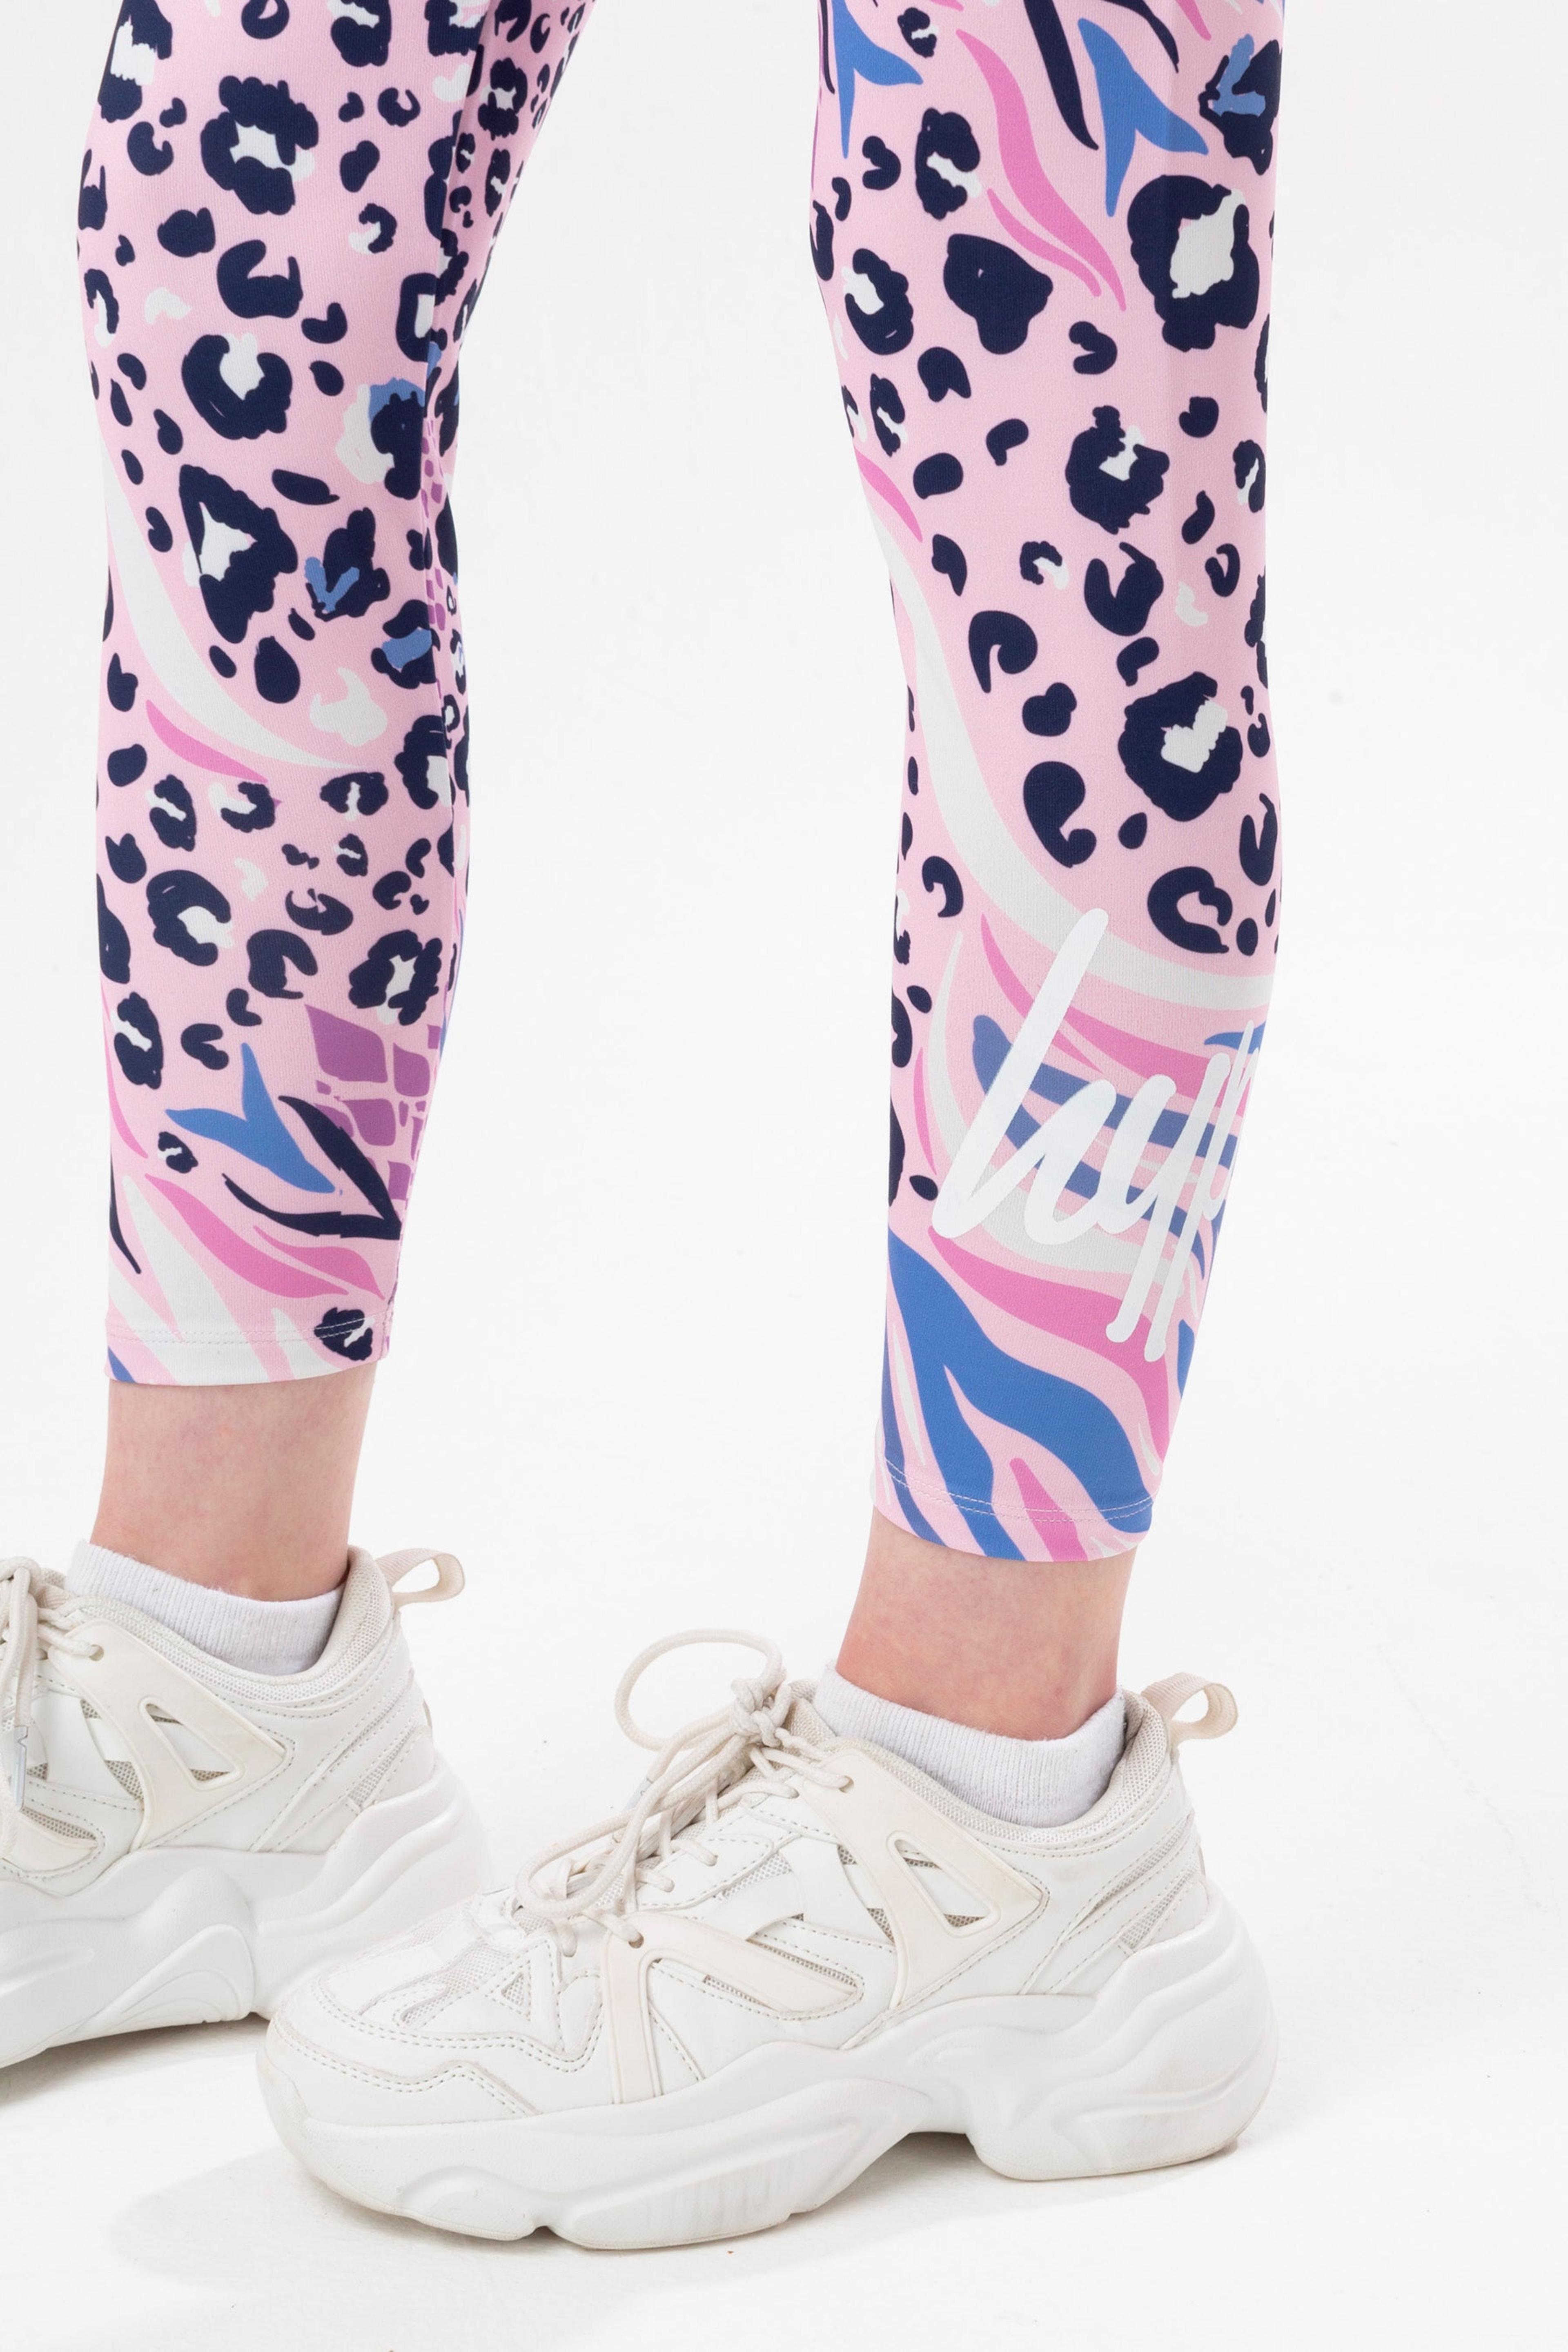 Alternate View 2 of HYPE GIRLS PINK ABSTRACT LEOPARD SCRIPT LEGGINGS